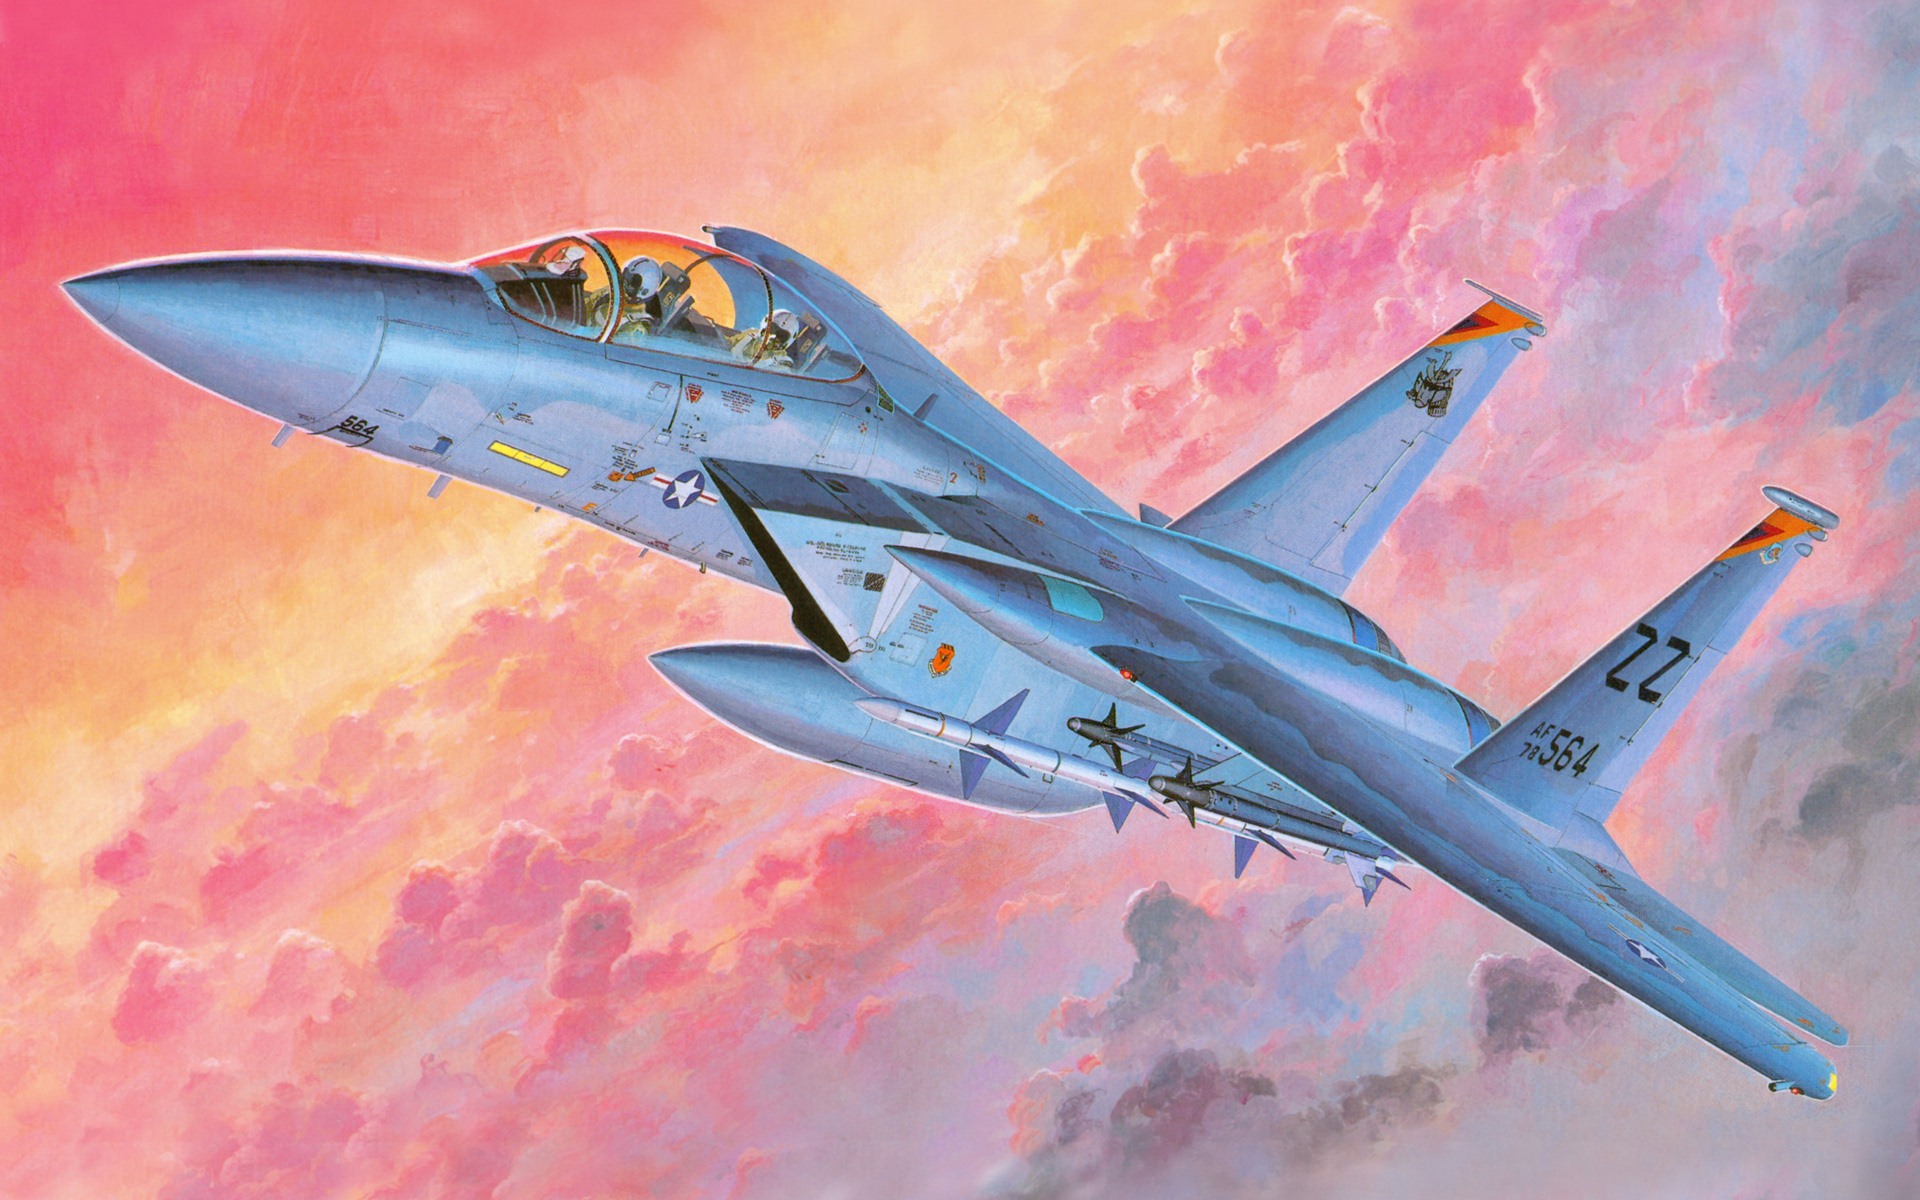 Military aircraft flight exquisite painting wallpapers #15 - 1920x1200